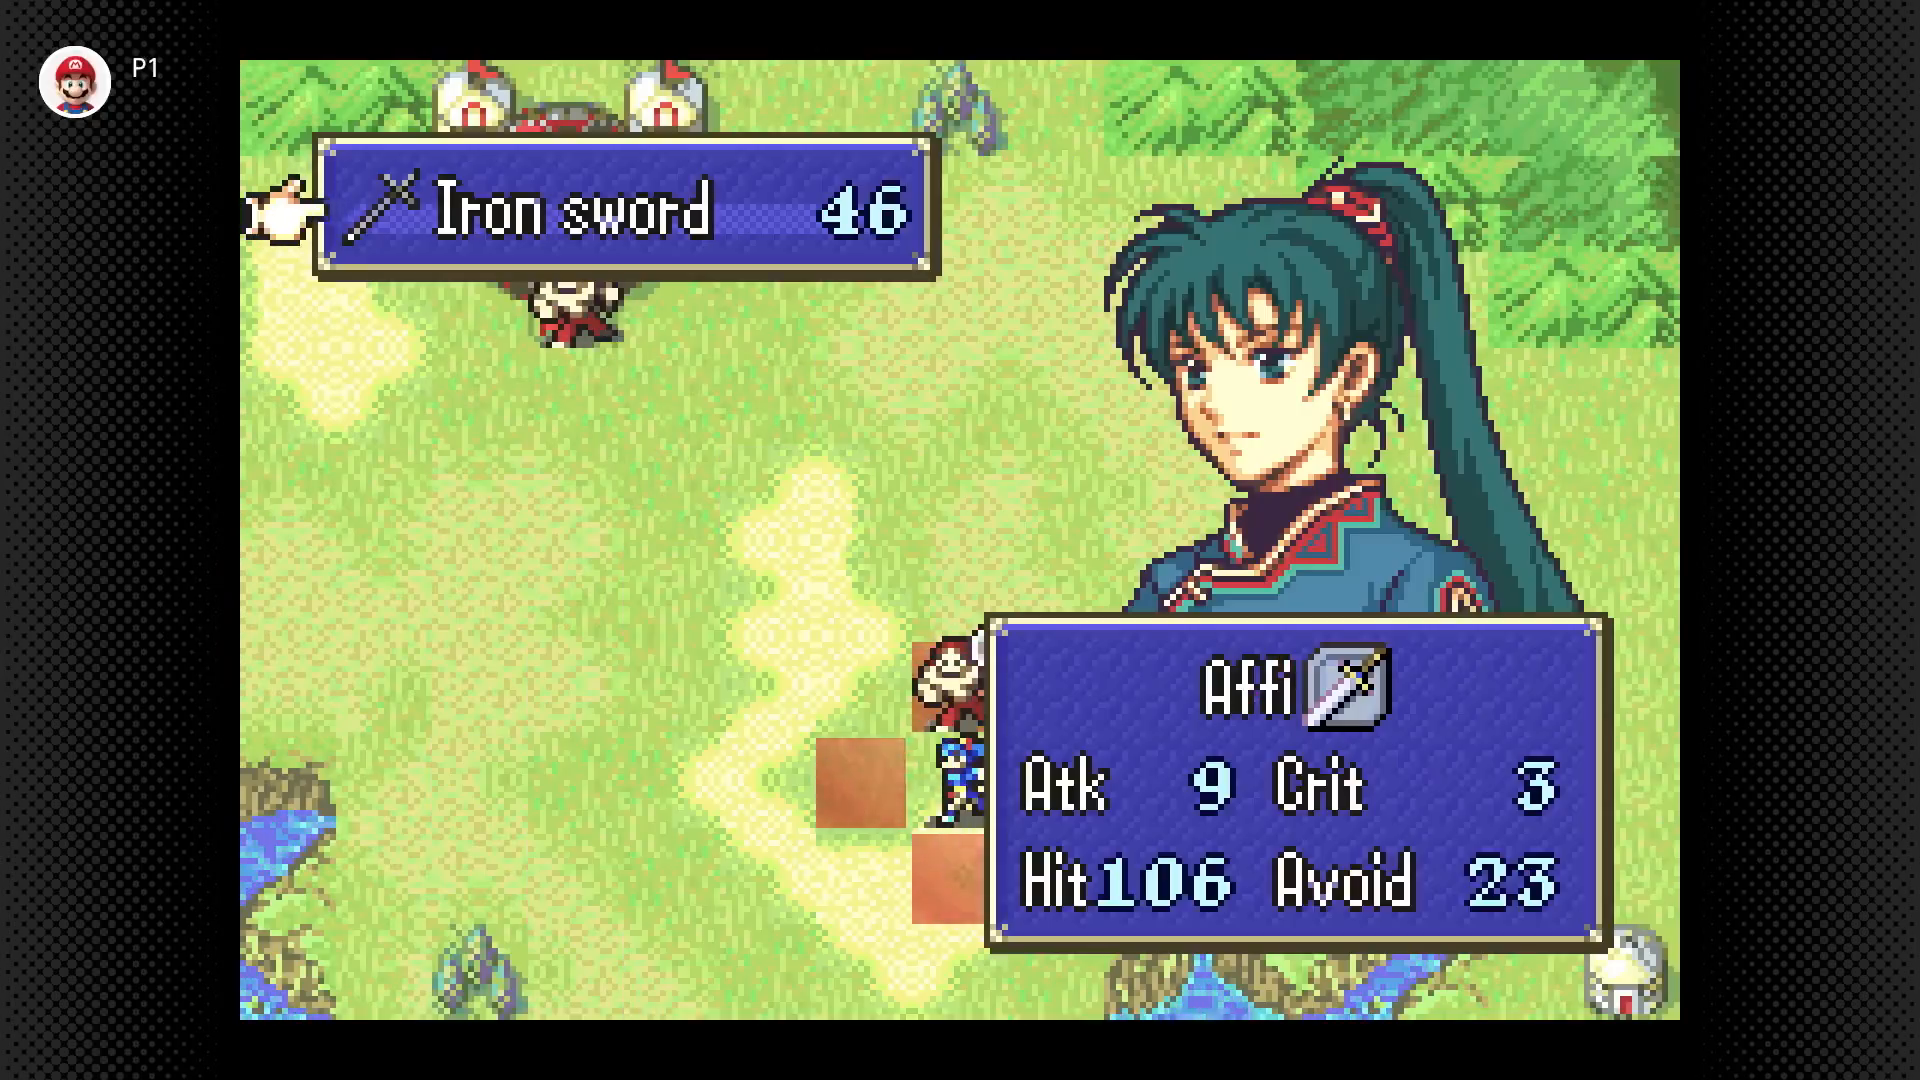 Fire Emblem GBA Games Added to Nintendo Switch Online